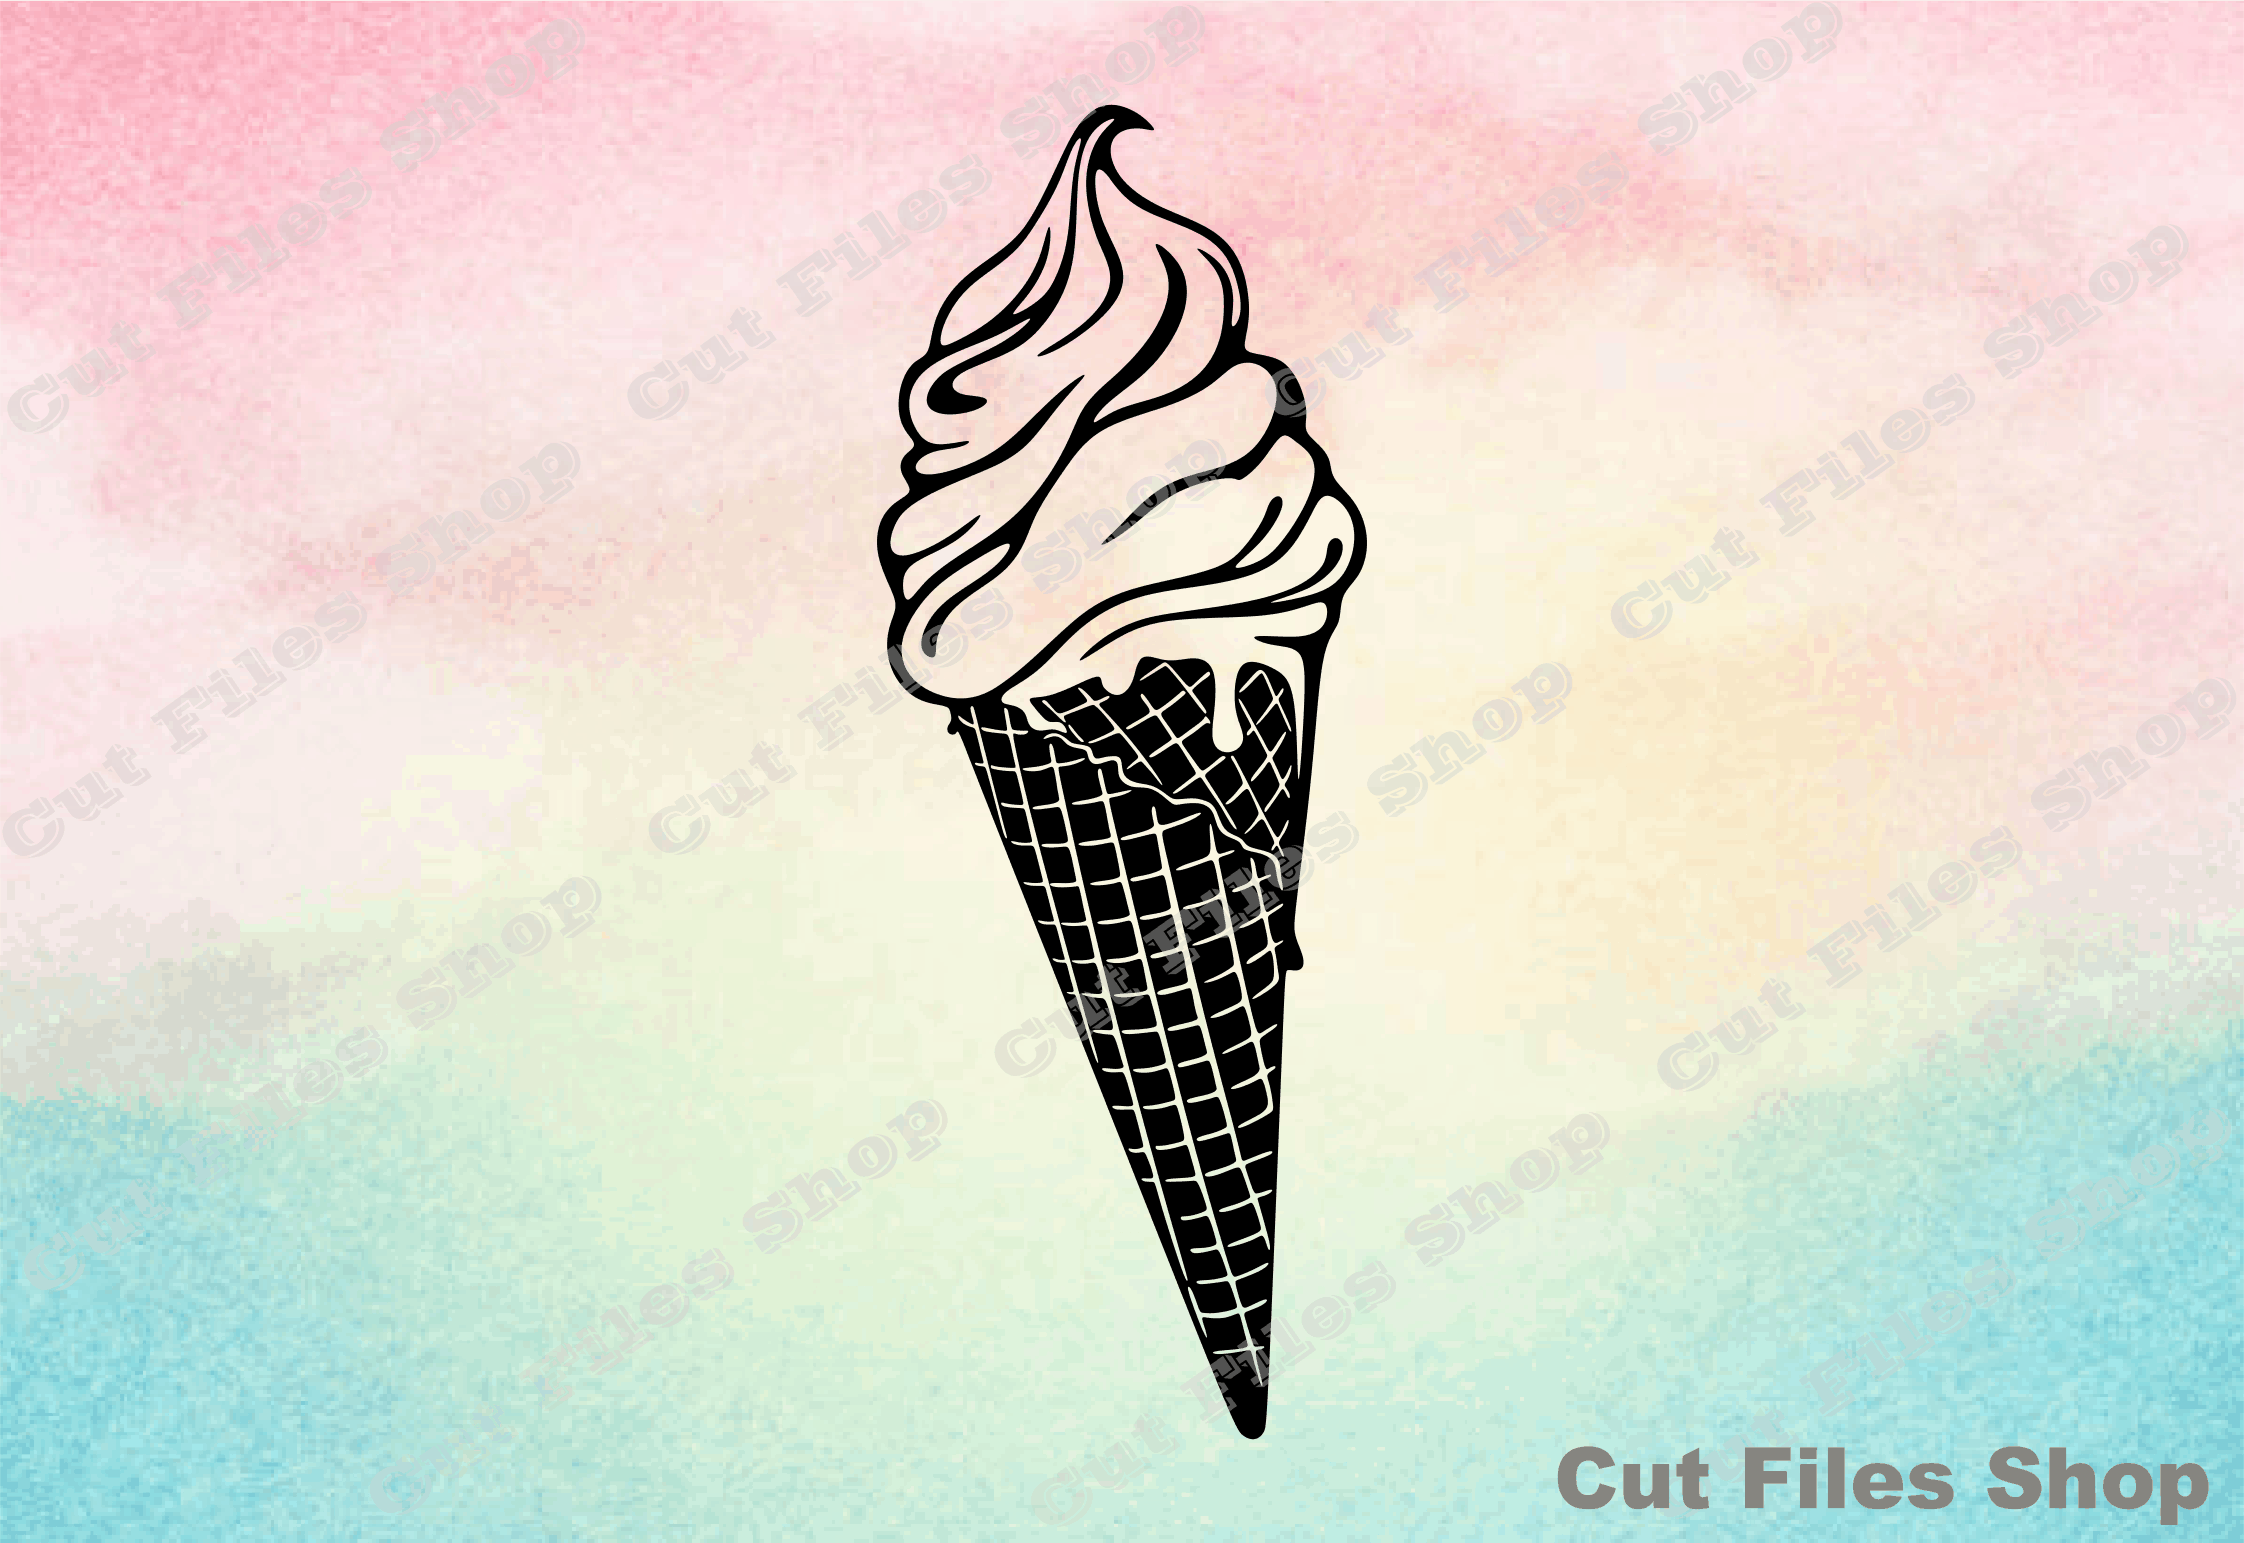 Cute Sweet Ice Cream SVG PNG Digital File Clipart Instant Download Cut File  for Cricut and Silhouette Full Stencil Sublimation Graphics